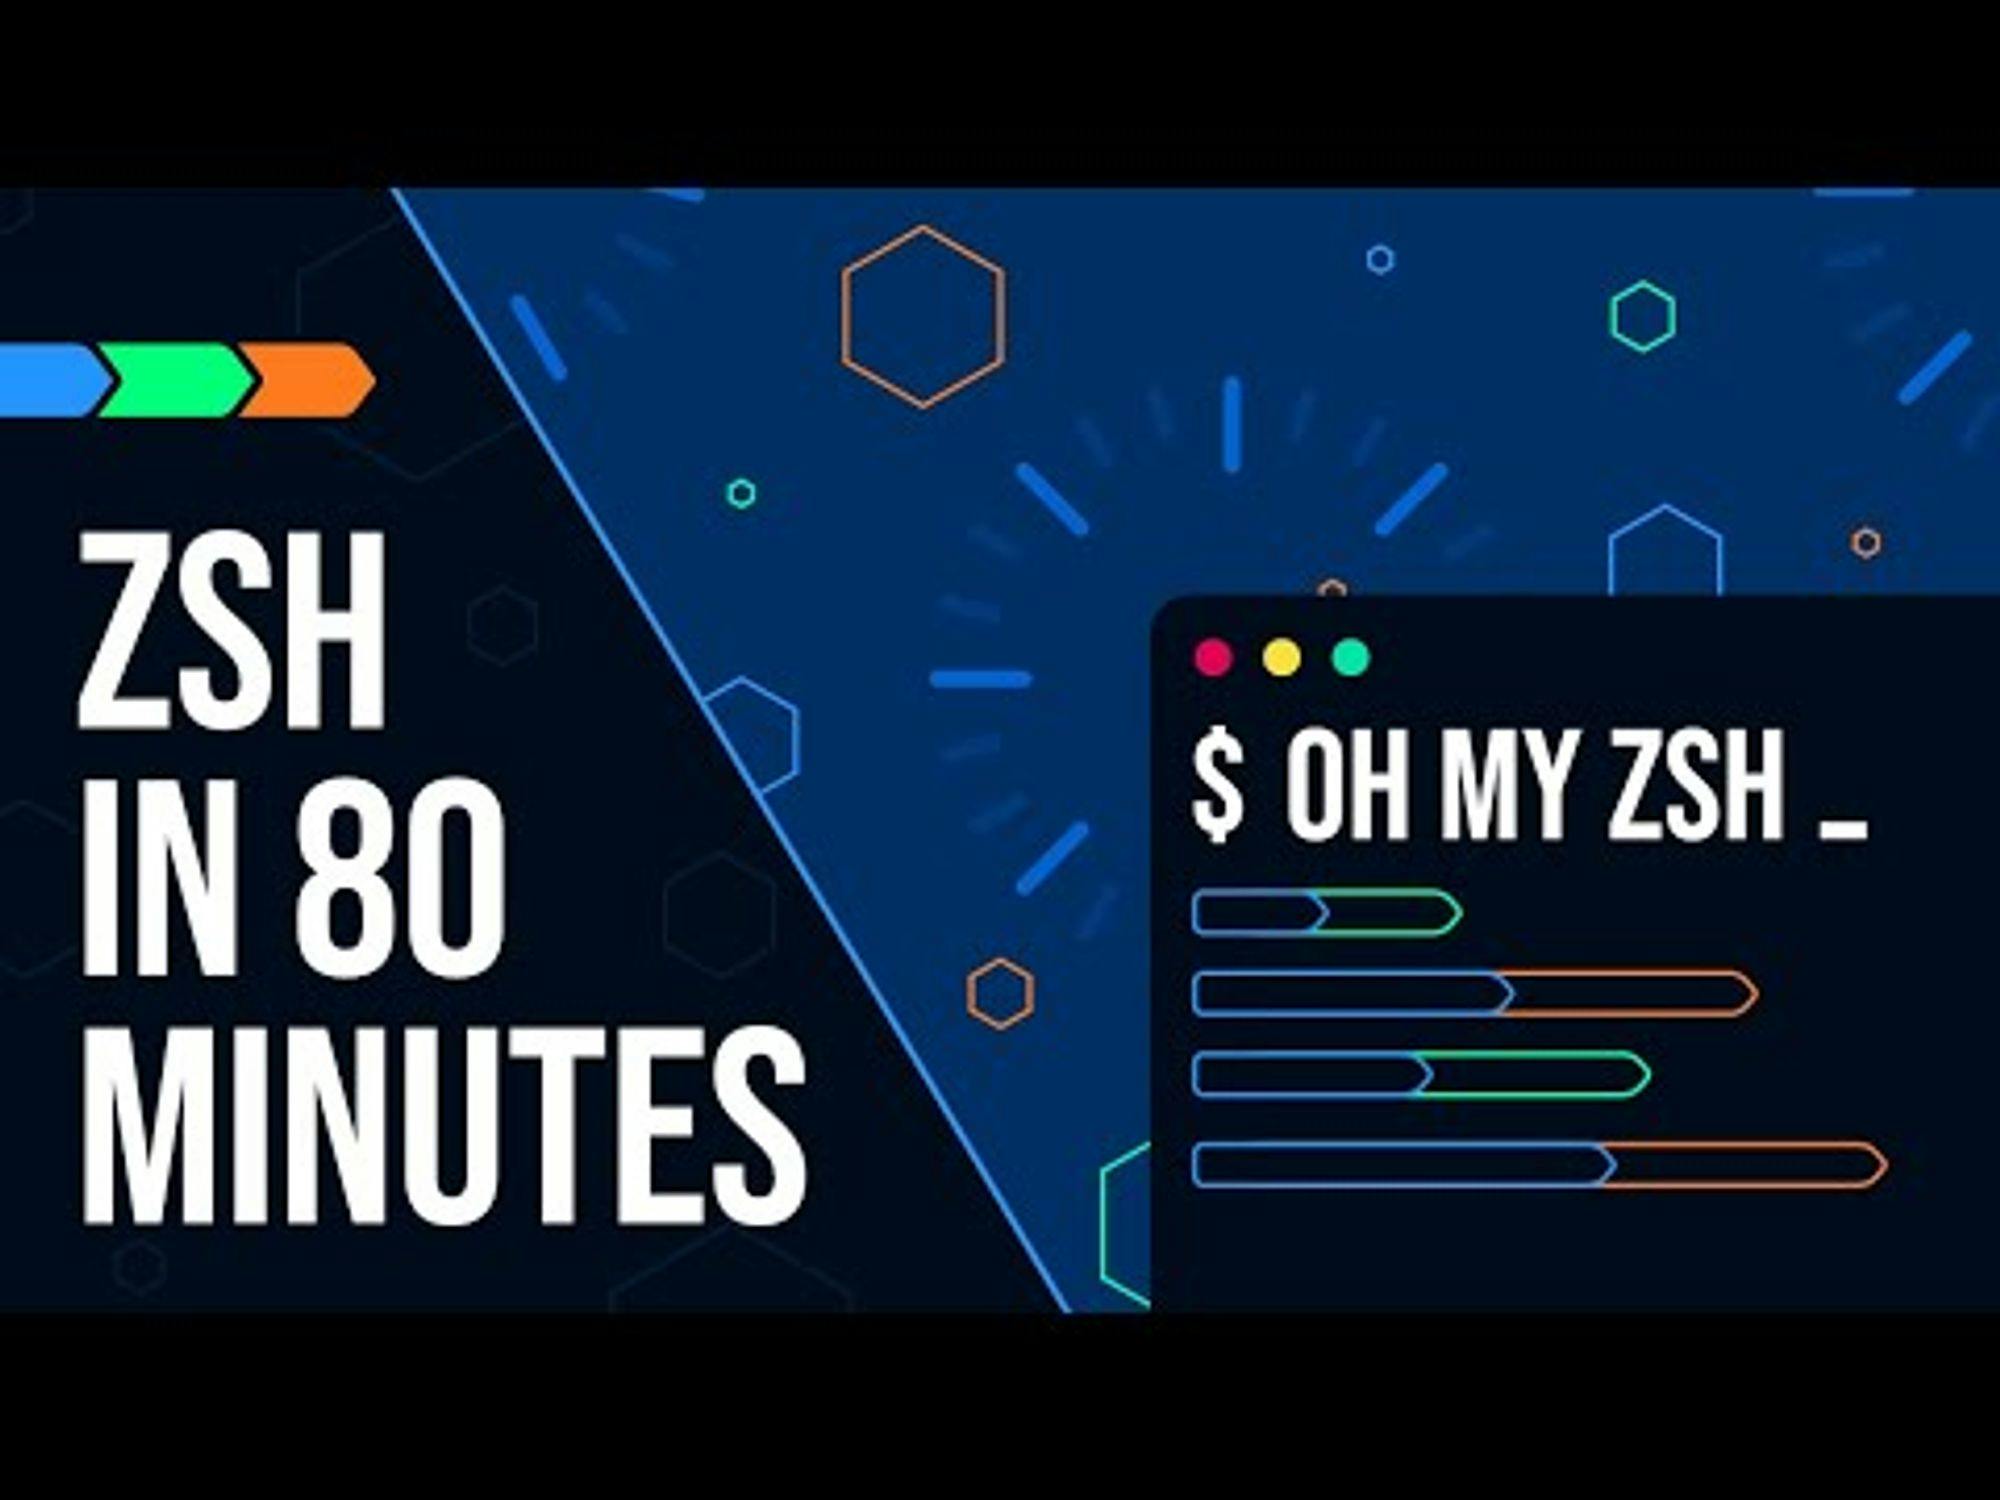 Learn Zsh in 80 Minutes macOS - Oh My Zsh - Command Line Power User | @karlhadwen